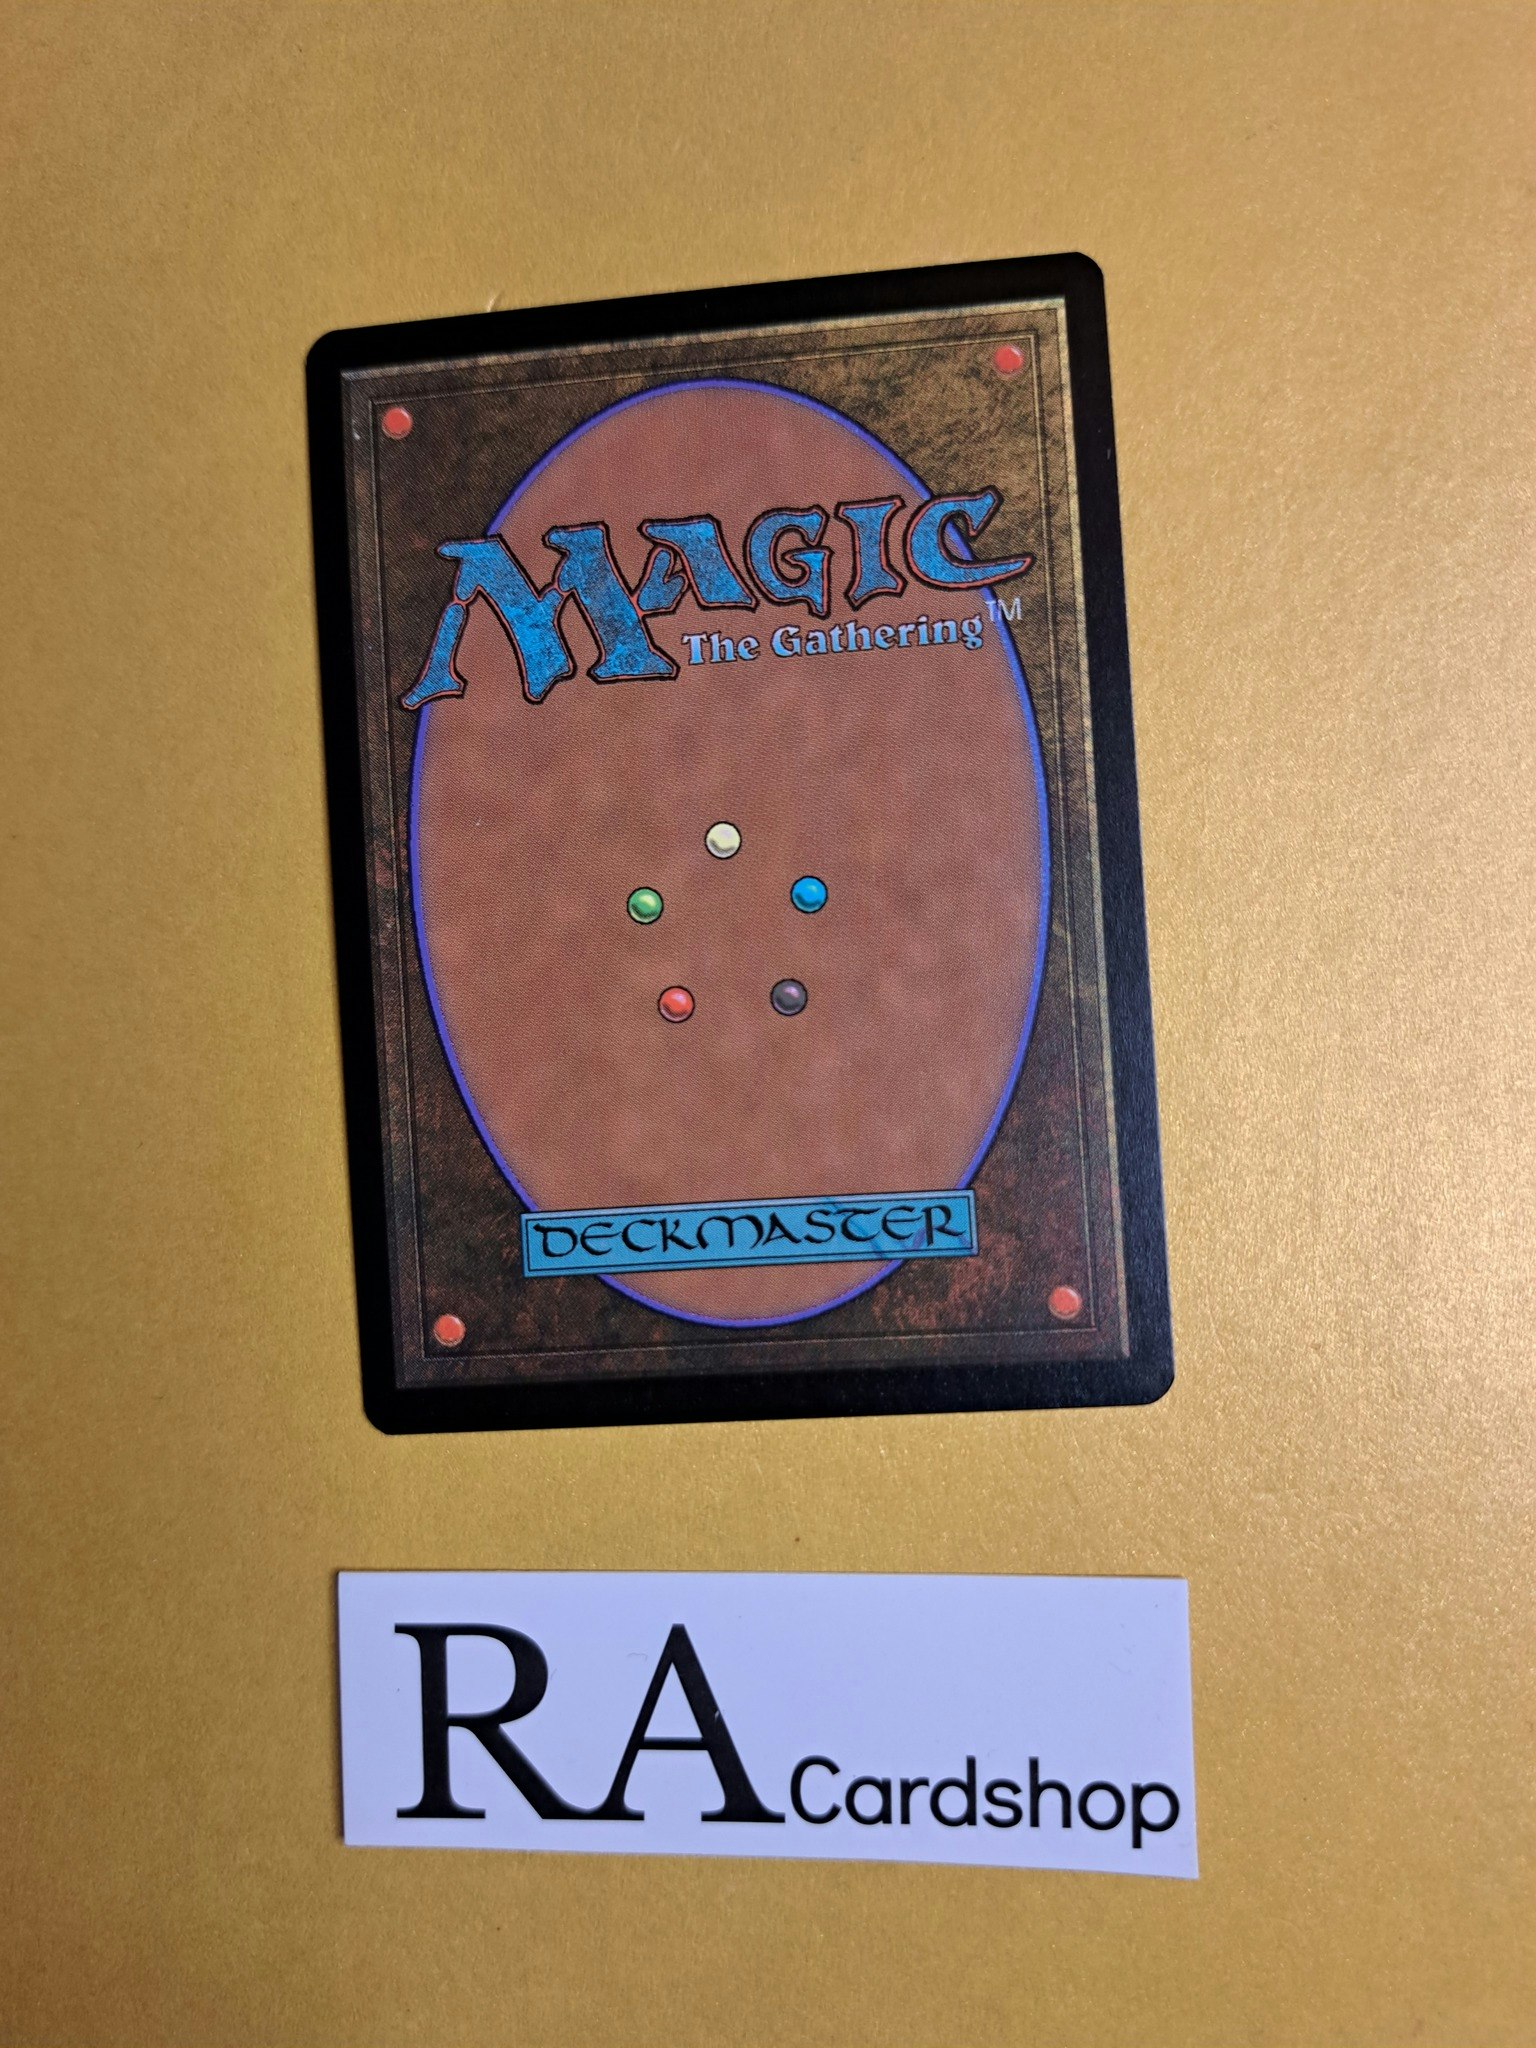 Shimmer of Possibility Common 051/259 Ravnica Allegiance (RNA) Magic the Gathering